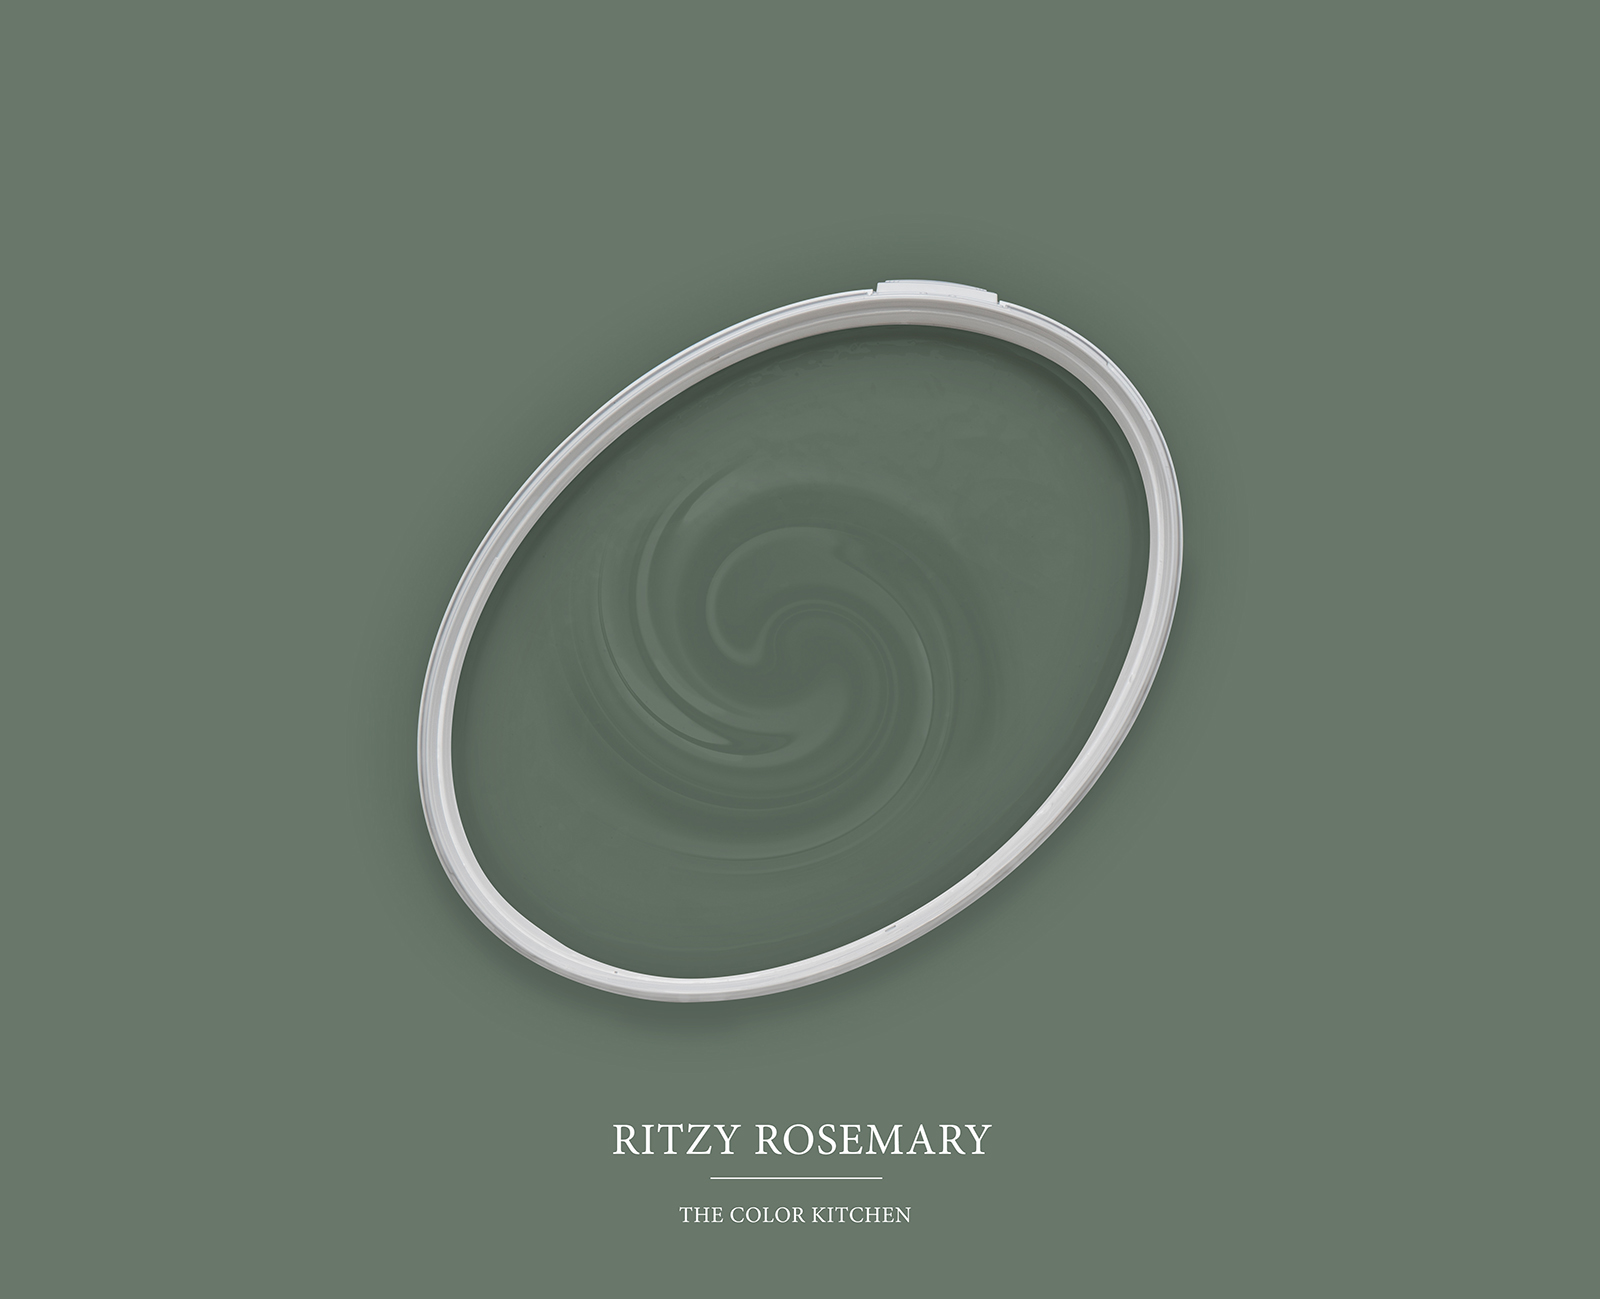         Wall Paint TCK4005 »Ritzy Rosemary« in homely green – 2.5 litre
    